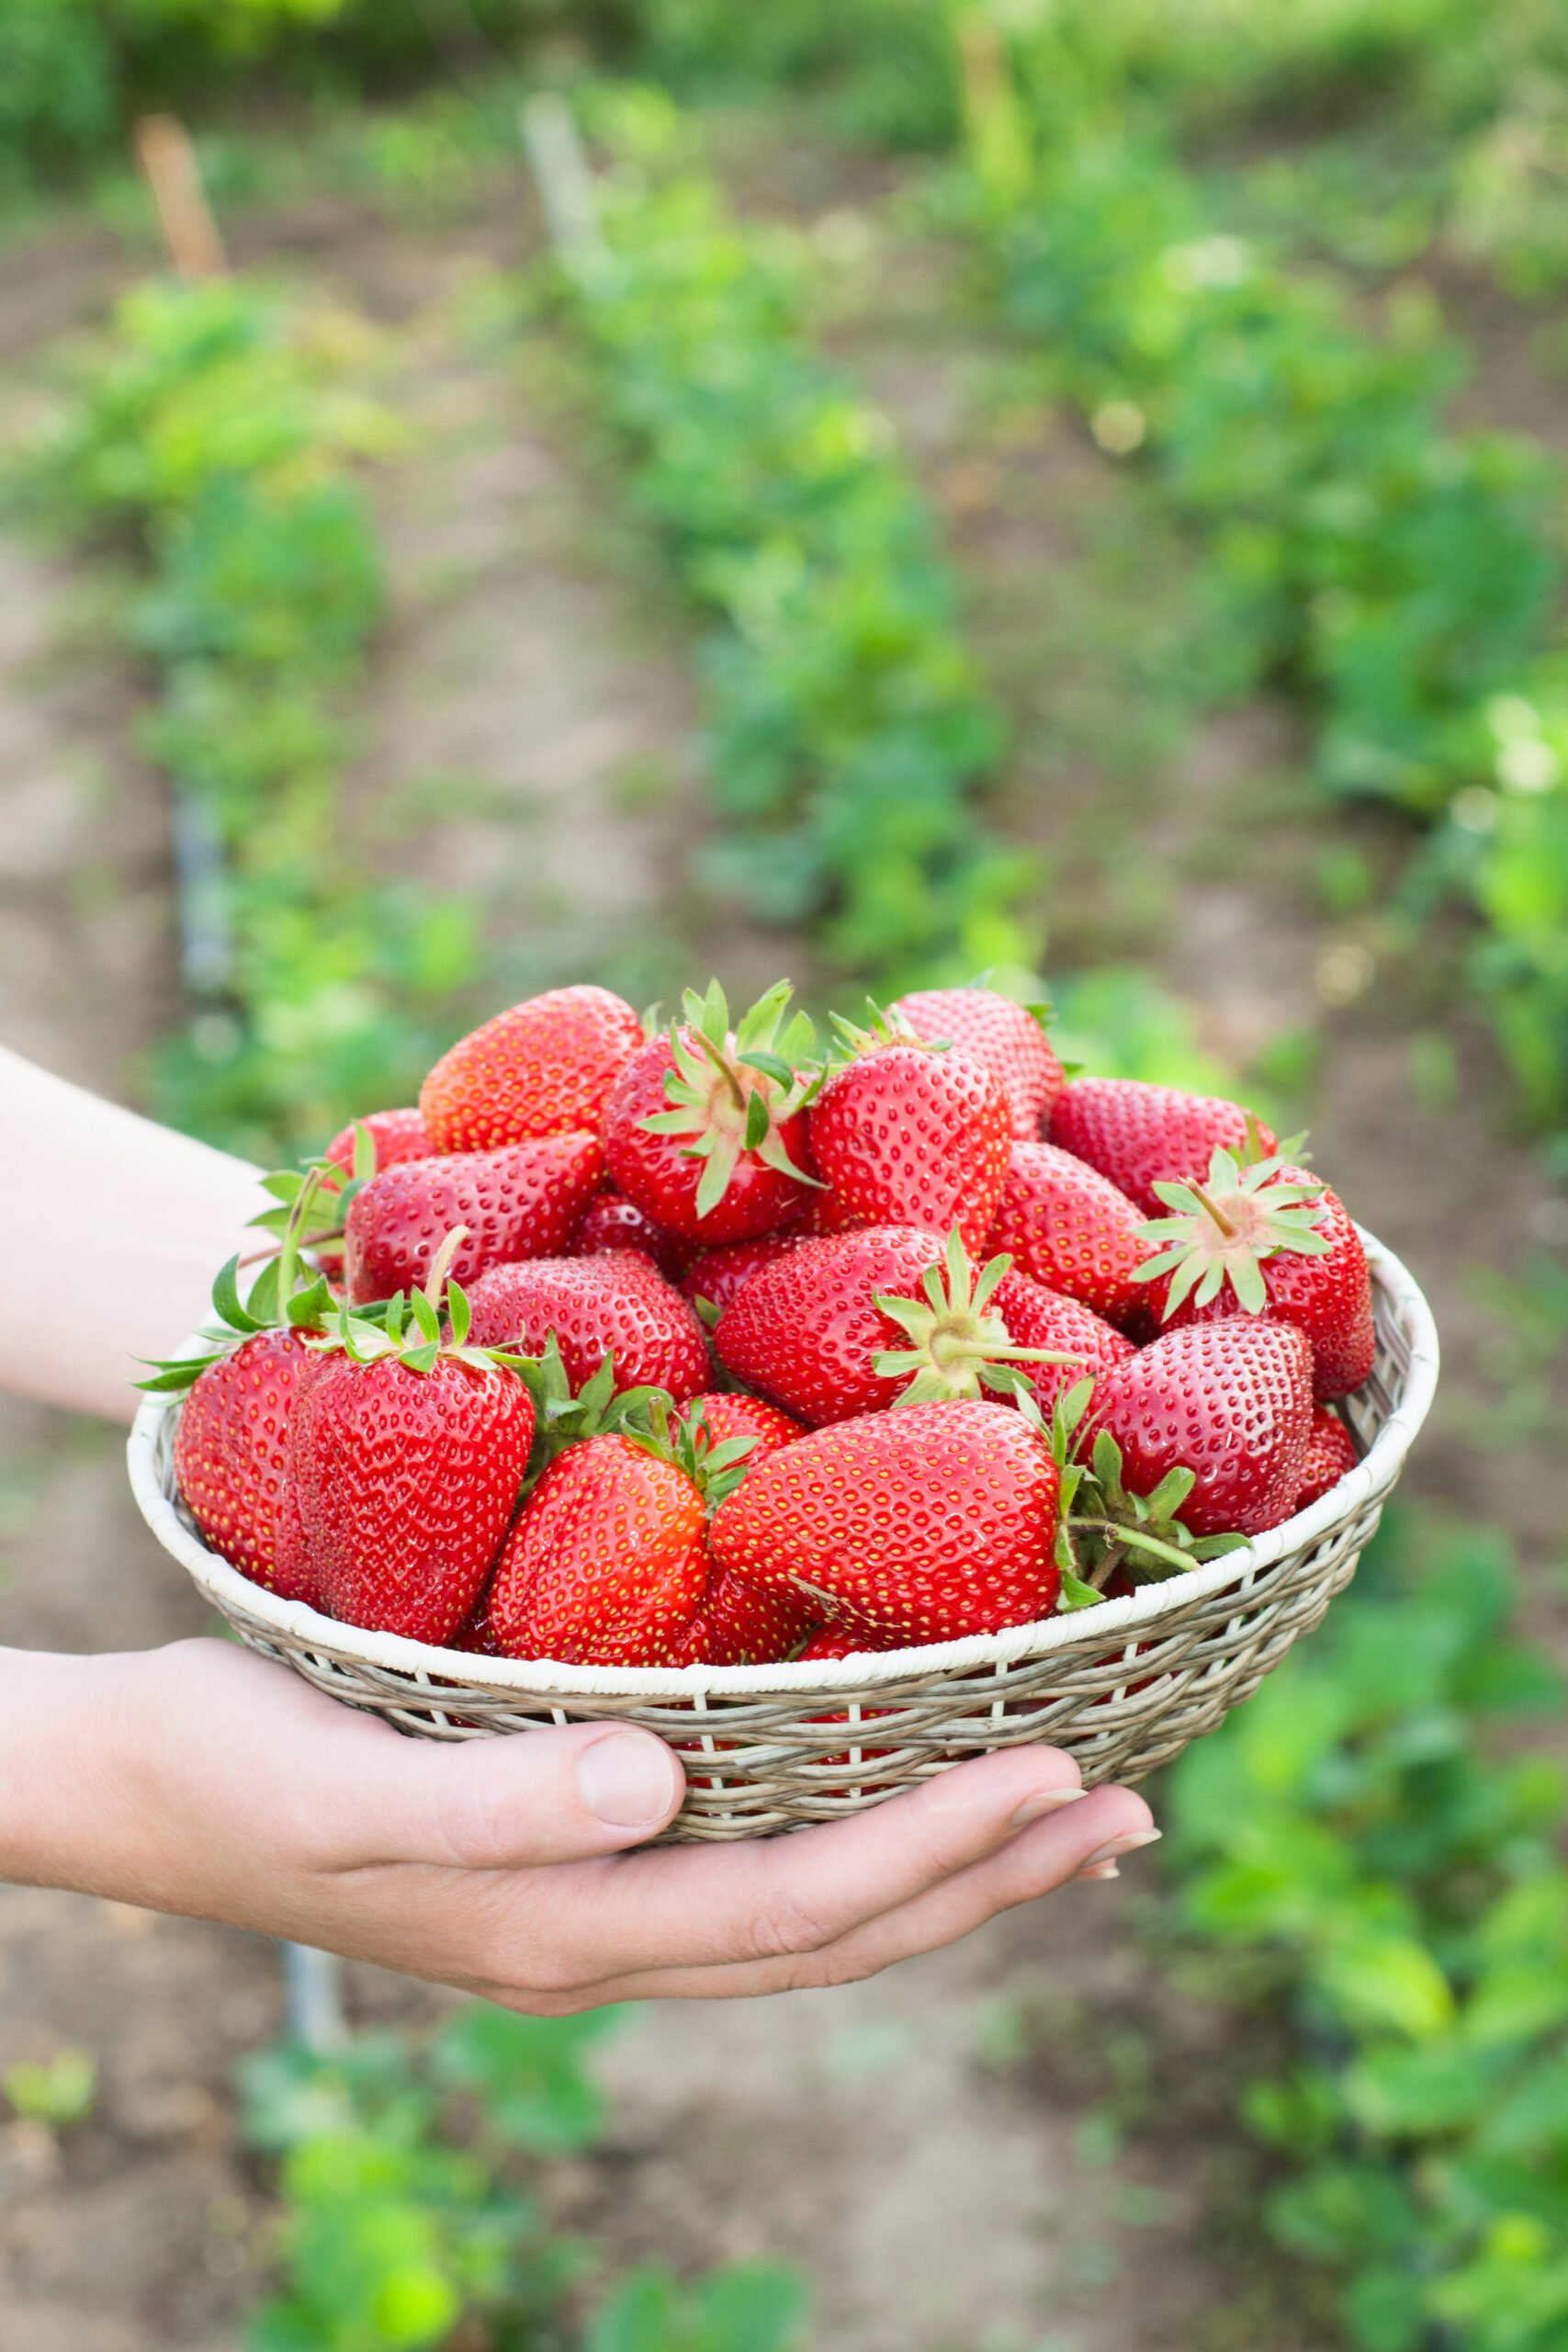 woman holding basket with strawberry - Want To Start Growing Your Own Food? The Best Plants To Start With